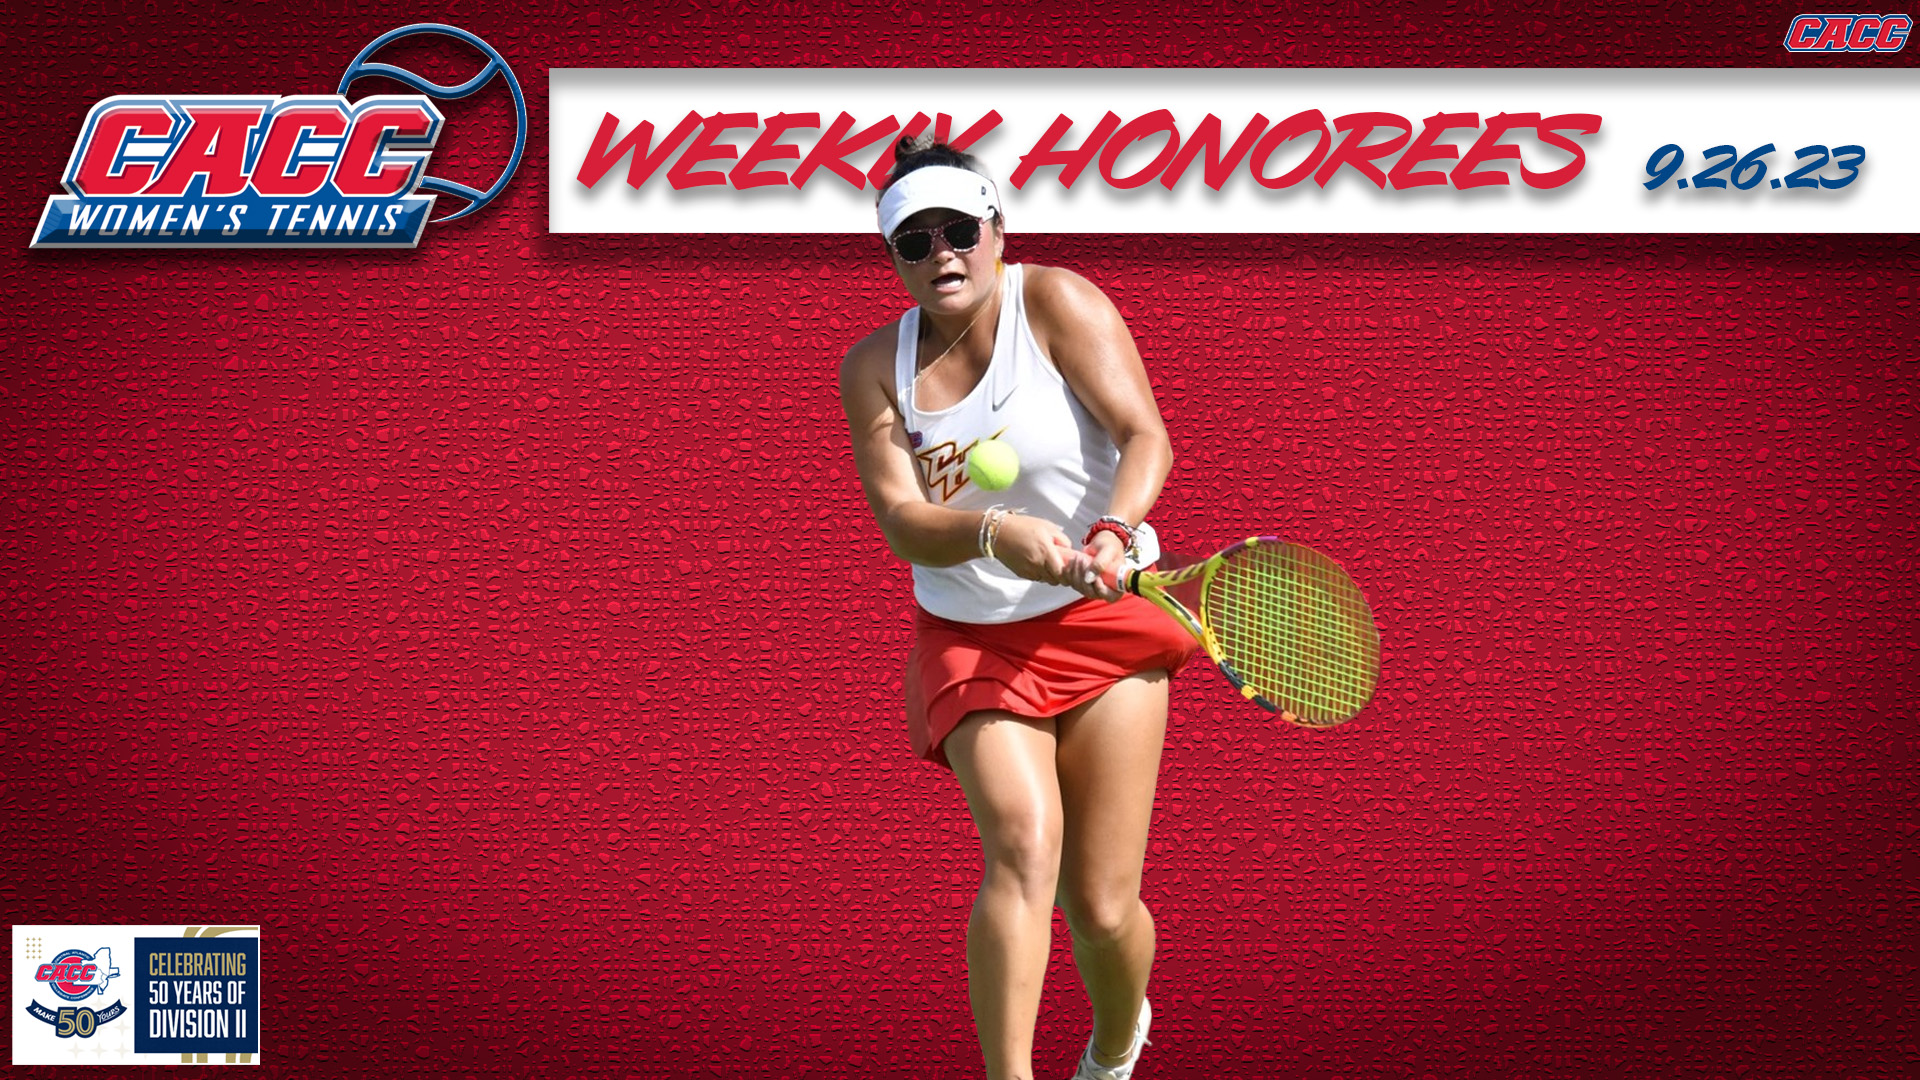 CACC Women's Tennis Weekly Honorees (9-26-23)